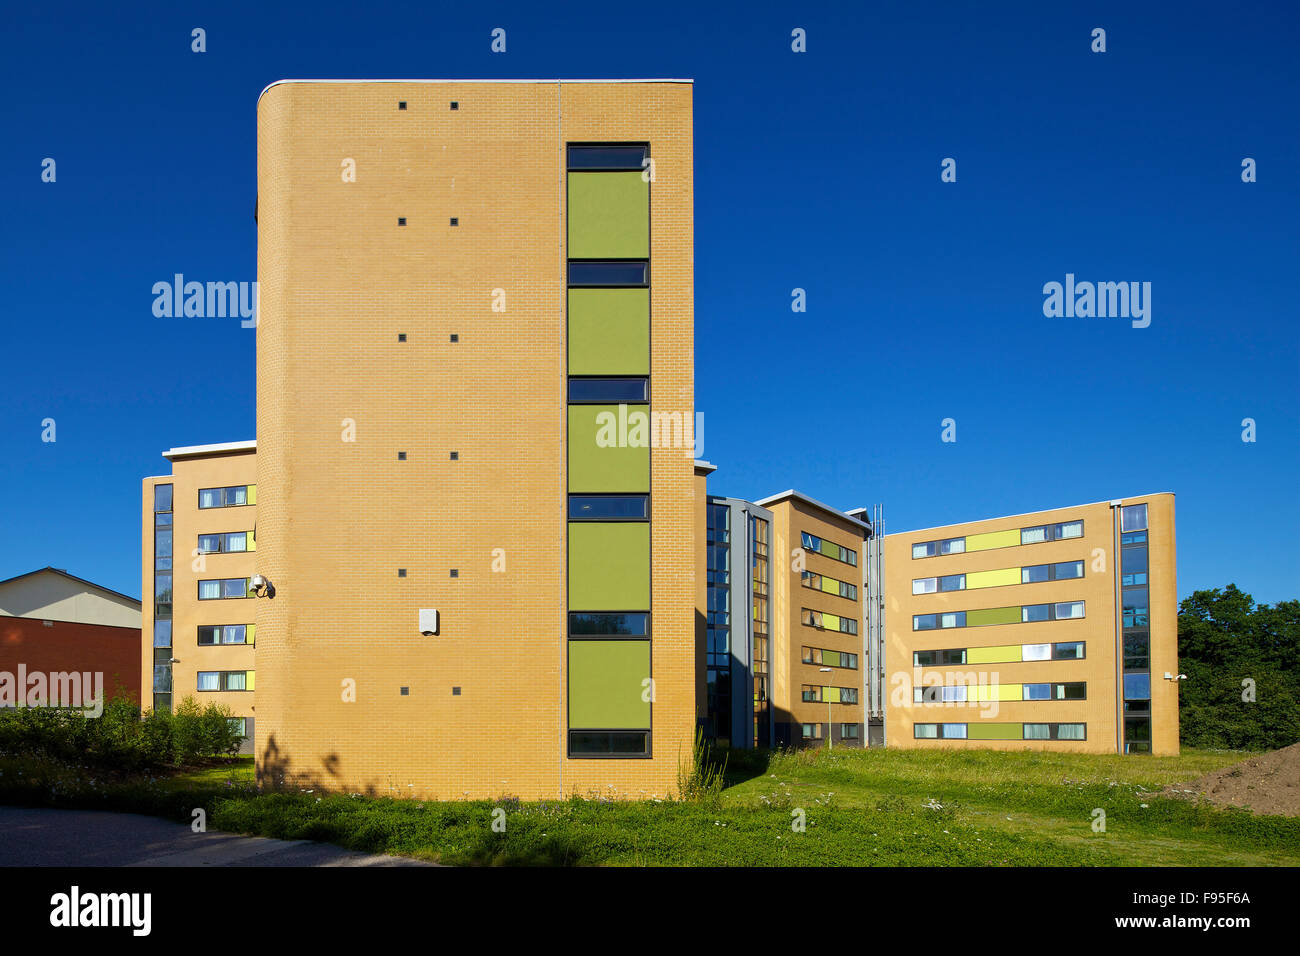 Mackinder and Stenton halls of residence, University of Reading, Berkshire. View of a side wall of a residential hall. Contemporary architecture. Stock Photo